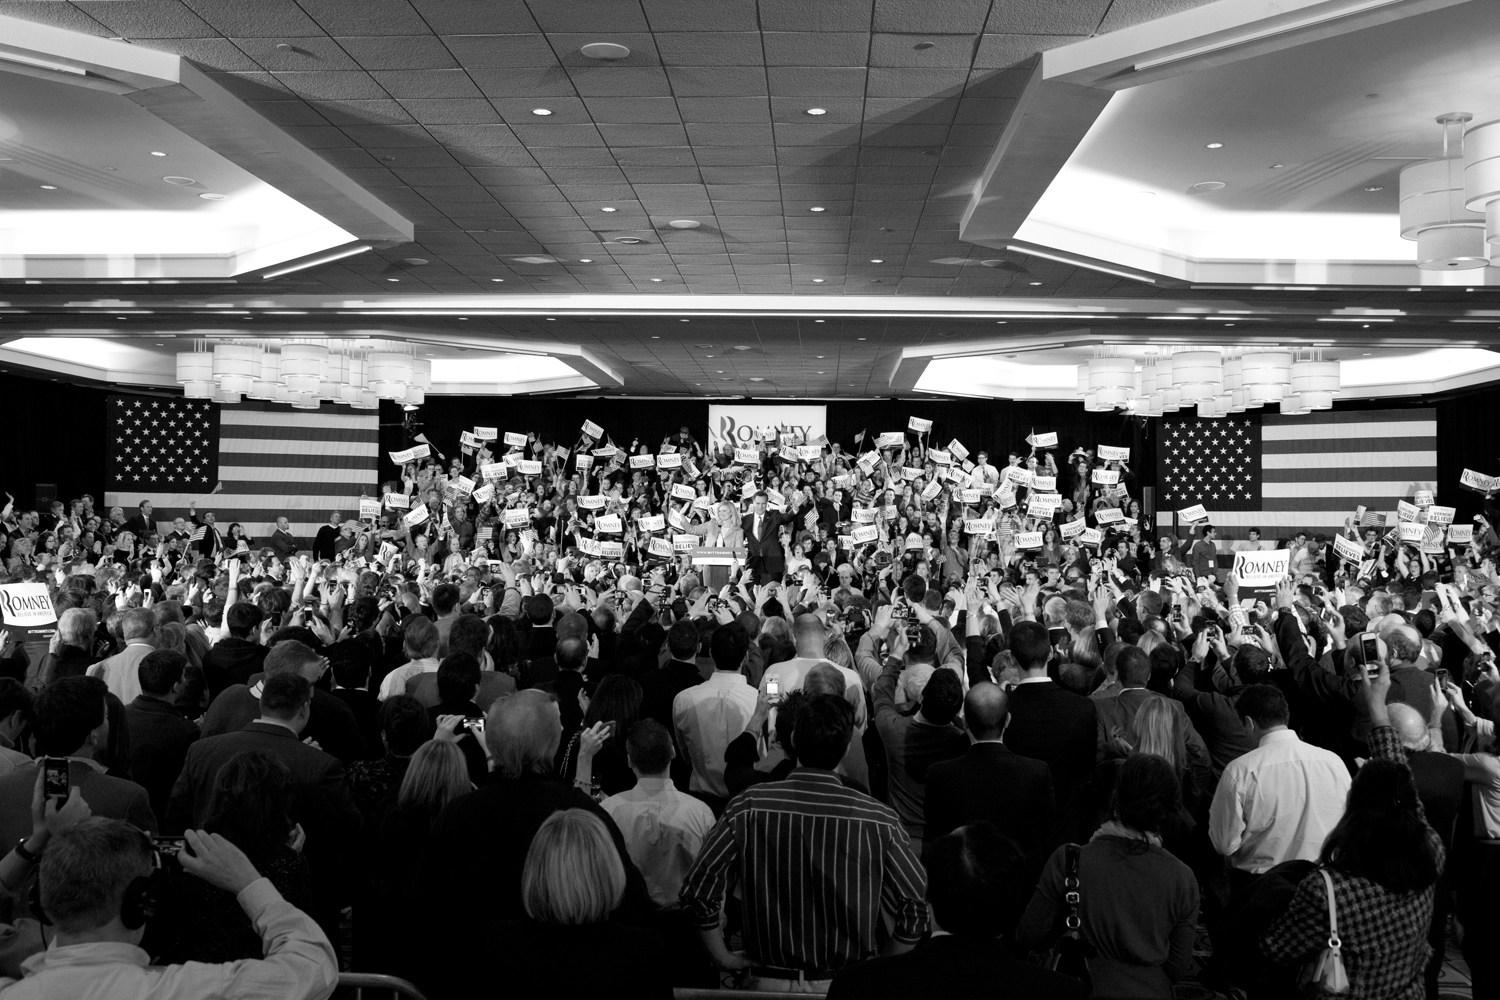 March 6, 2012. Overview of the crowd during a Super Tuesday event for Mitt Romney at the Westin Copley Place in Boston.